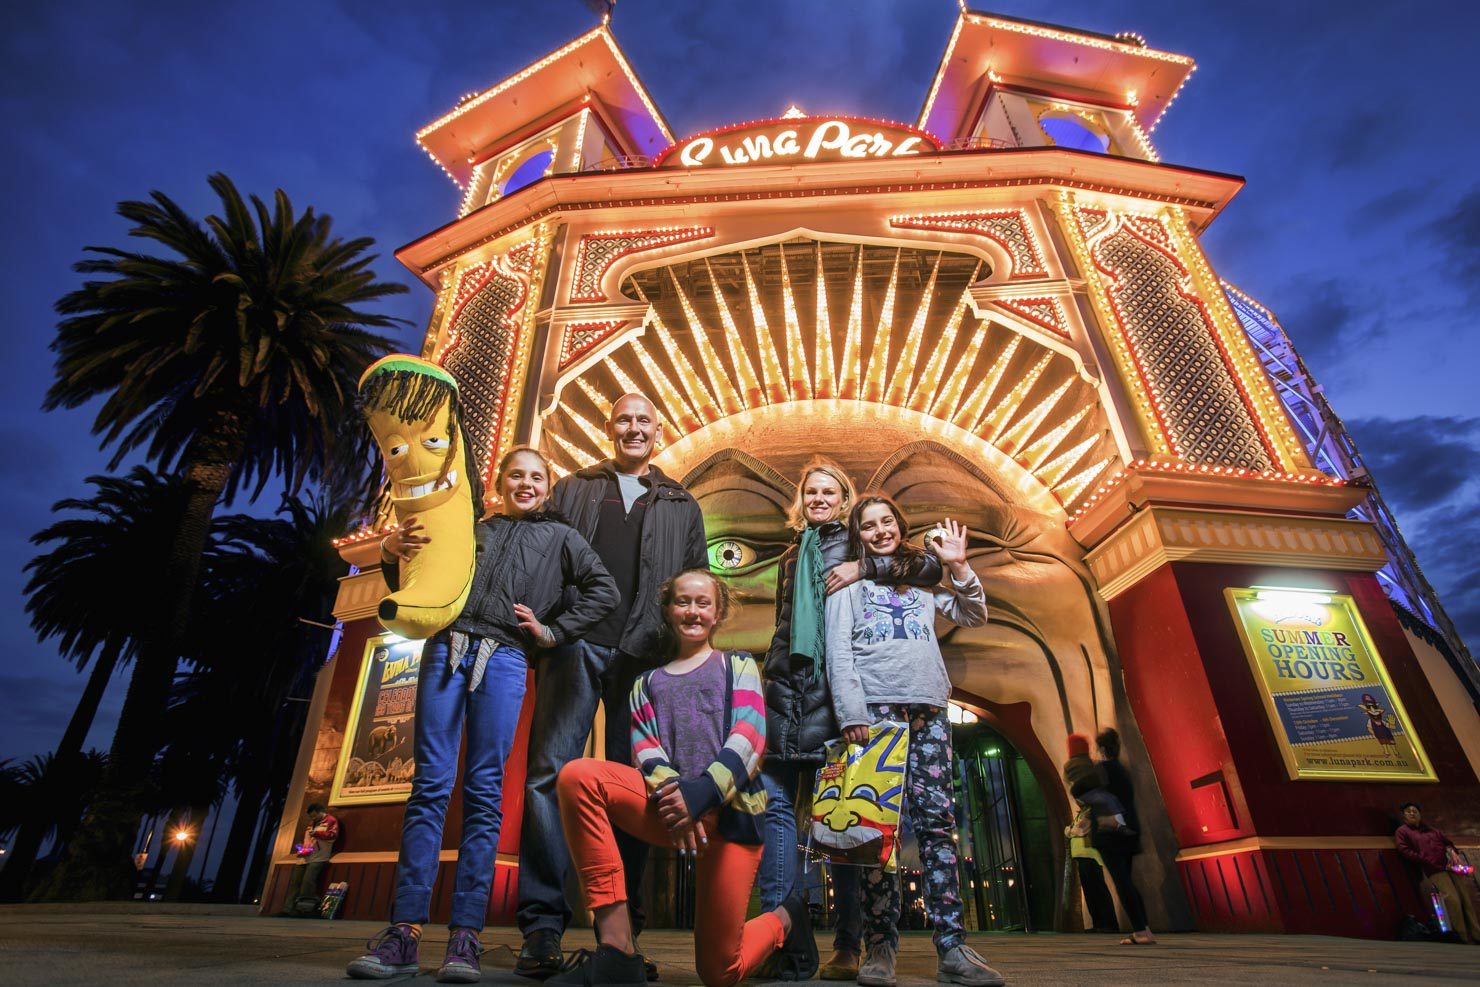 Luna Park at night with family